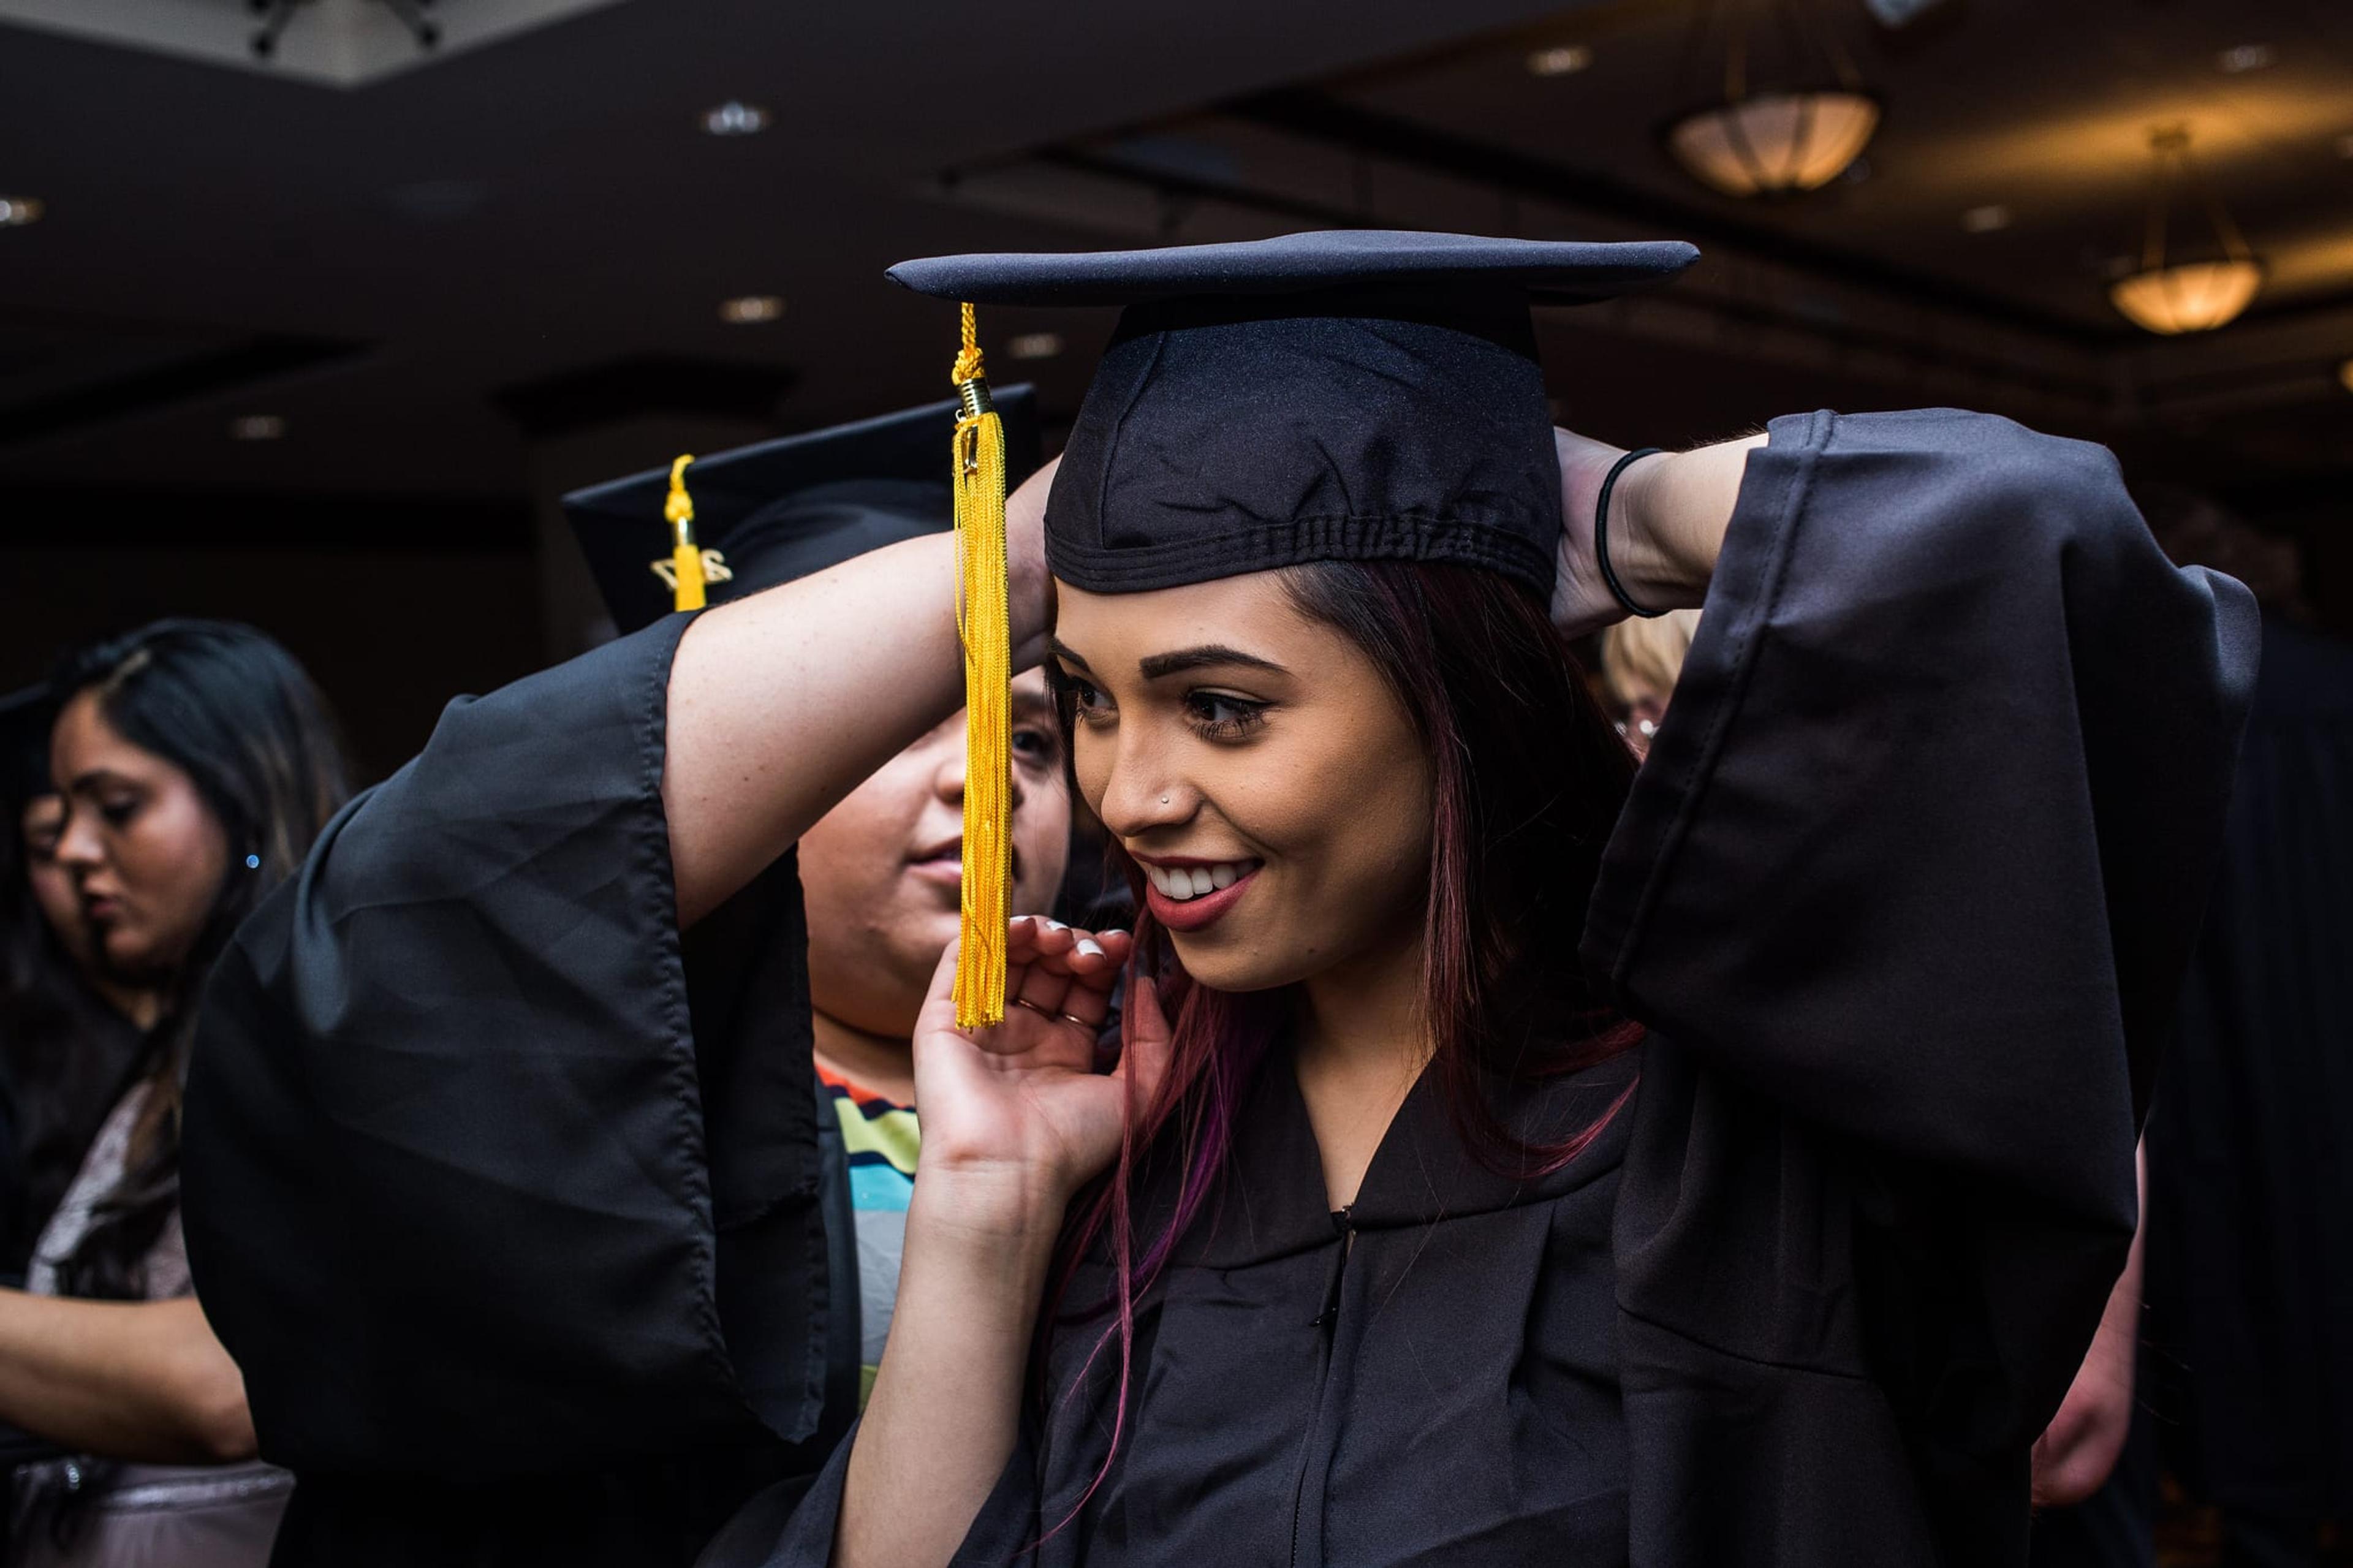 Image of a woman about to graduate from college in cap and gown. A friend is adjusting her cap for her.